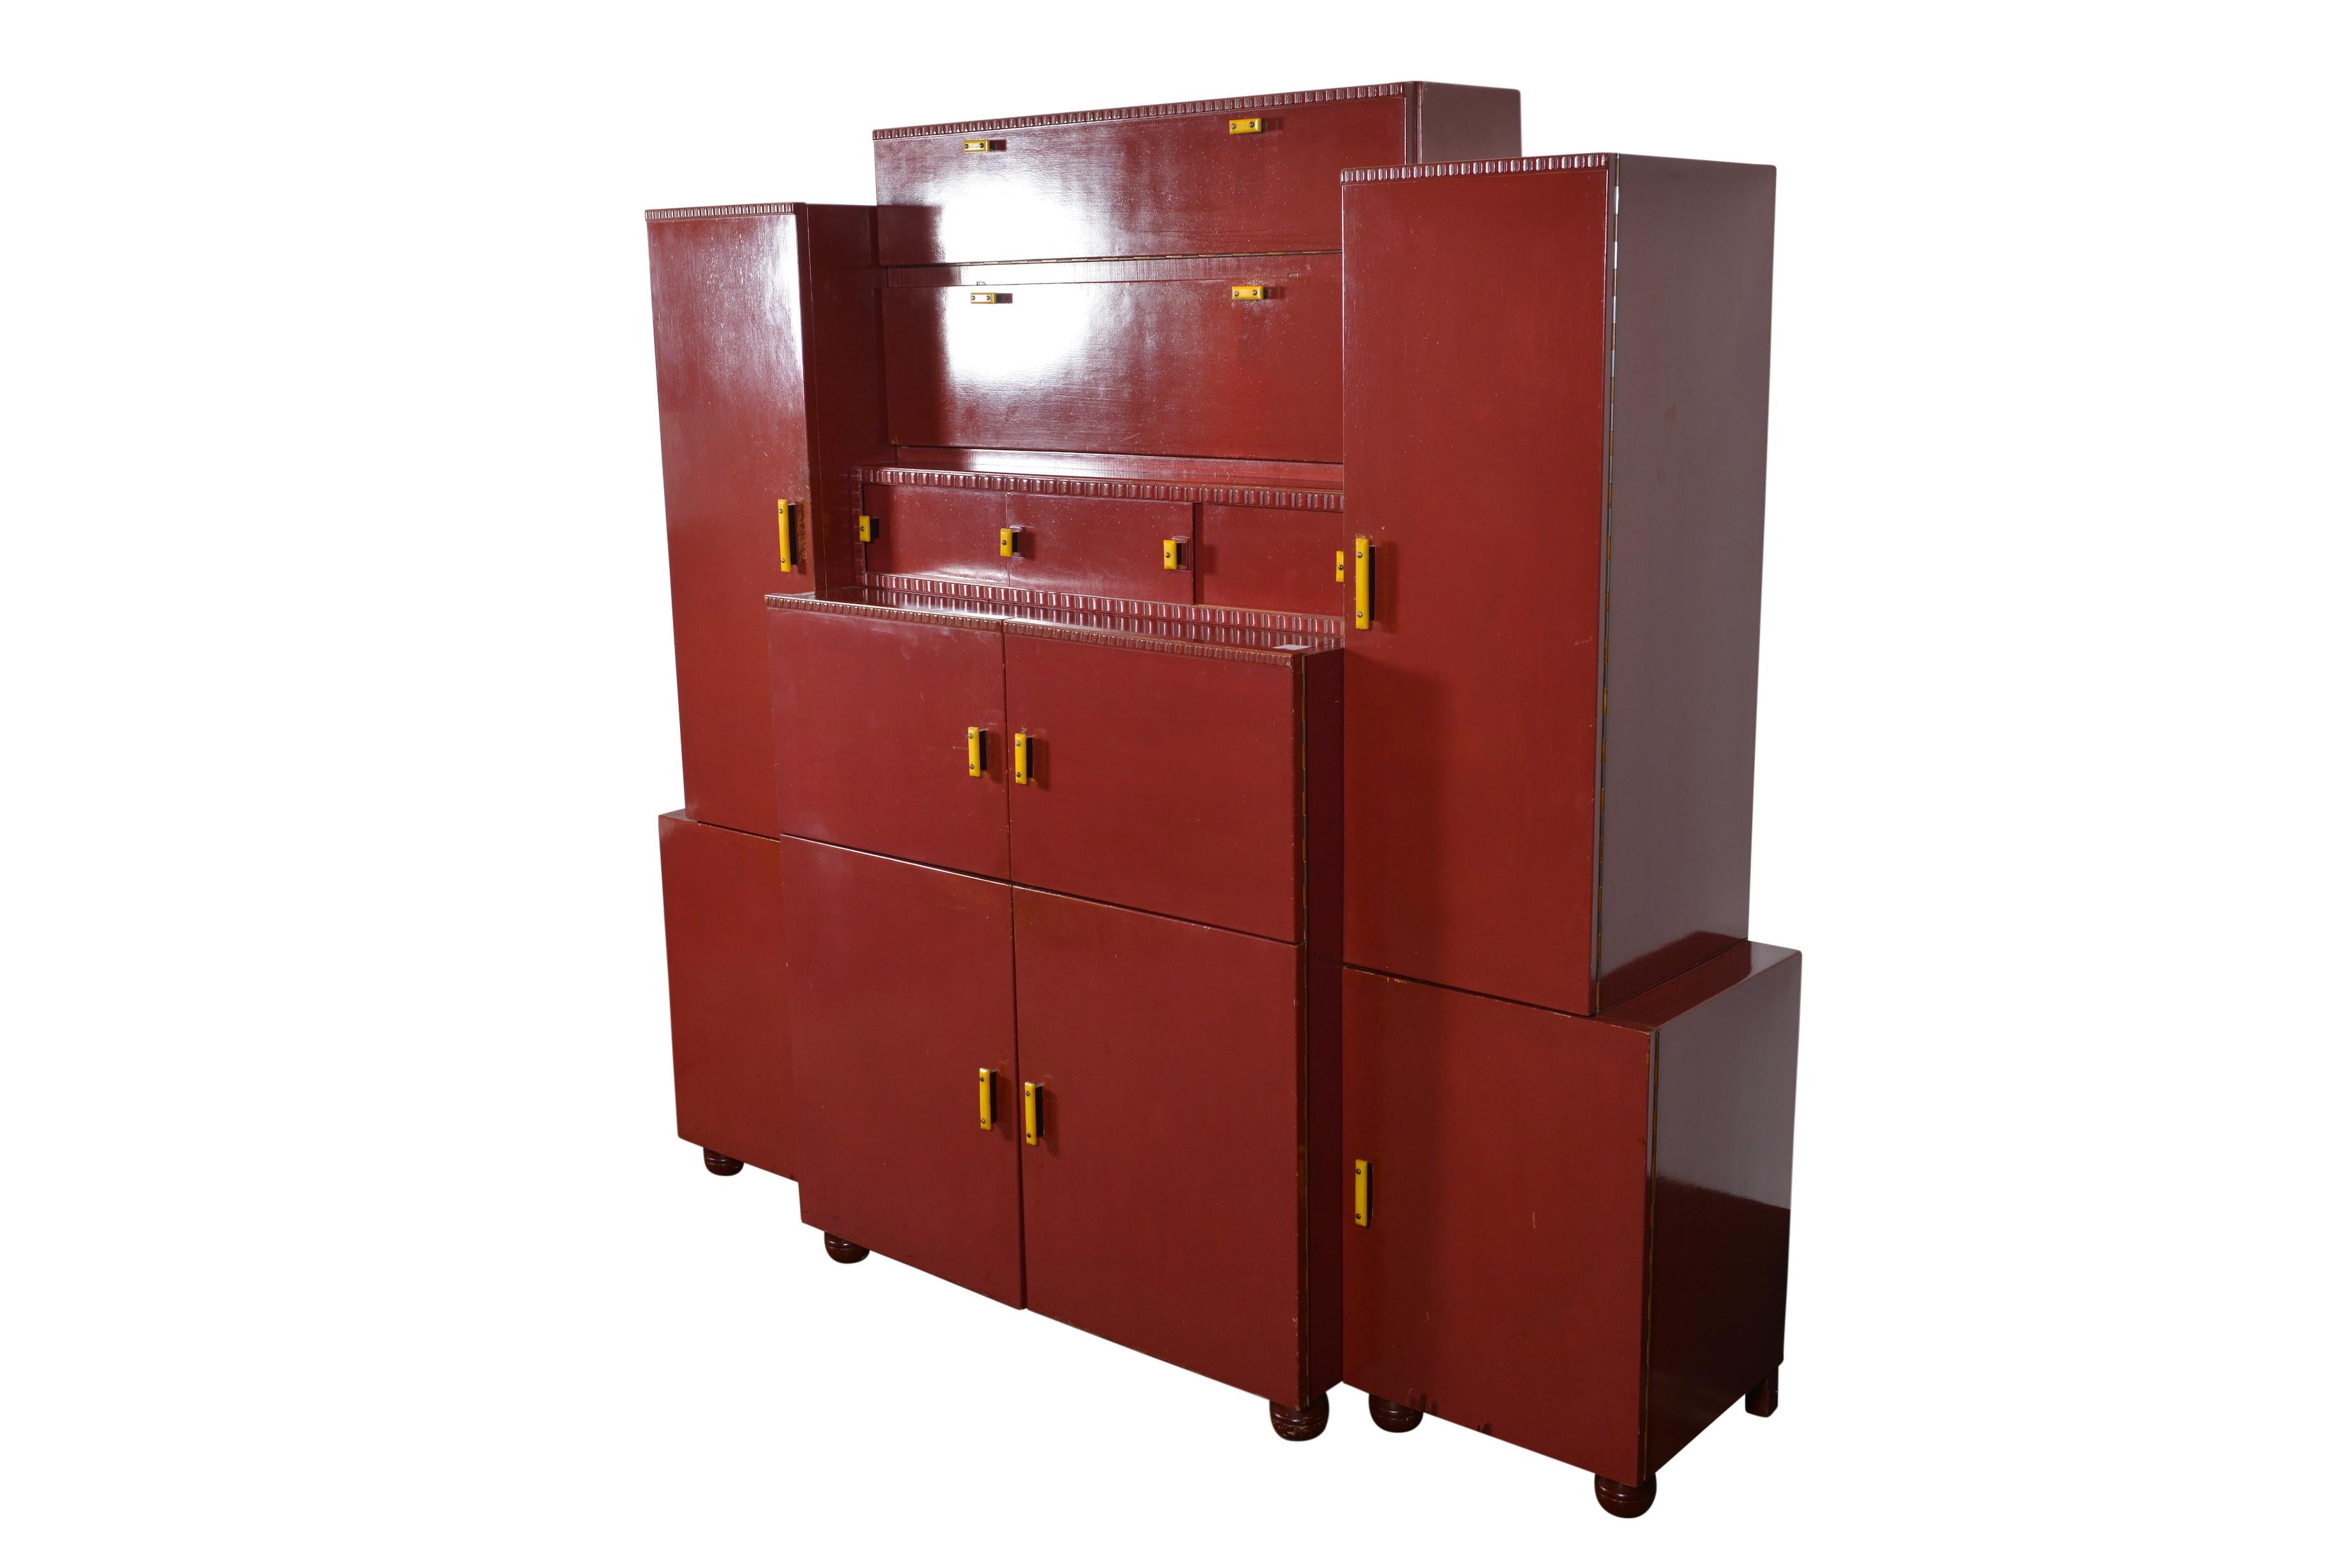 Art Deco cubist cabinet in striking red original color. The influence of Cubism gives this Art Deco cabinet a more fragmented, geometric character. Art Deco flowingly varied in its influences, taking inspiration from Egyptian art, Aztec Art, ship,